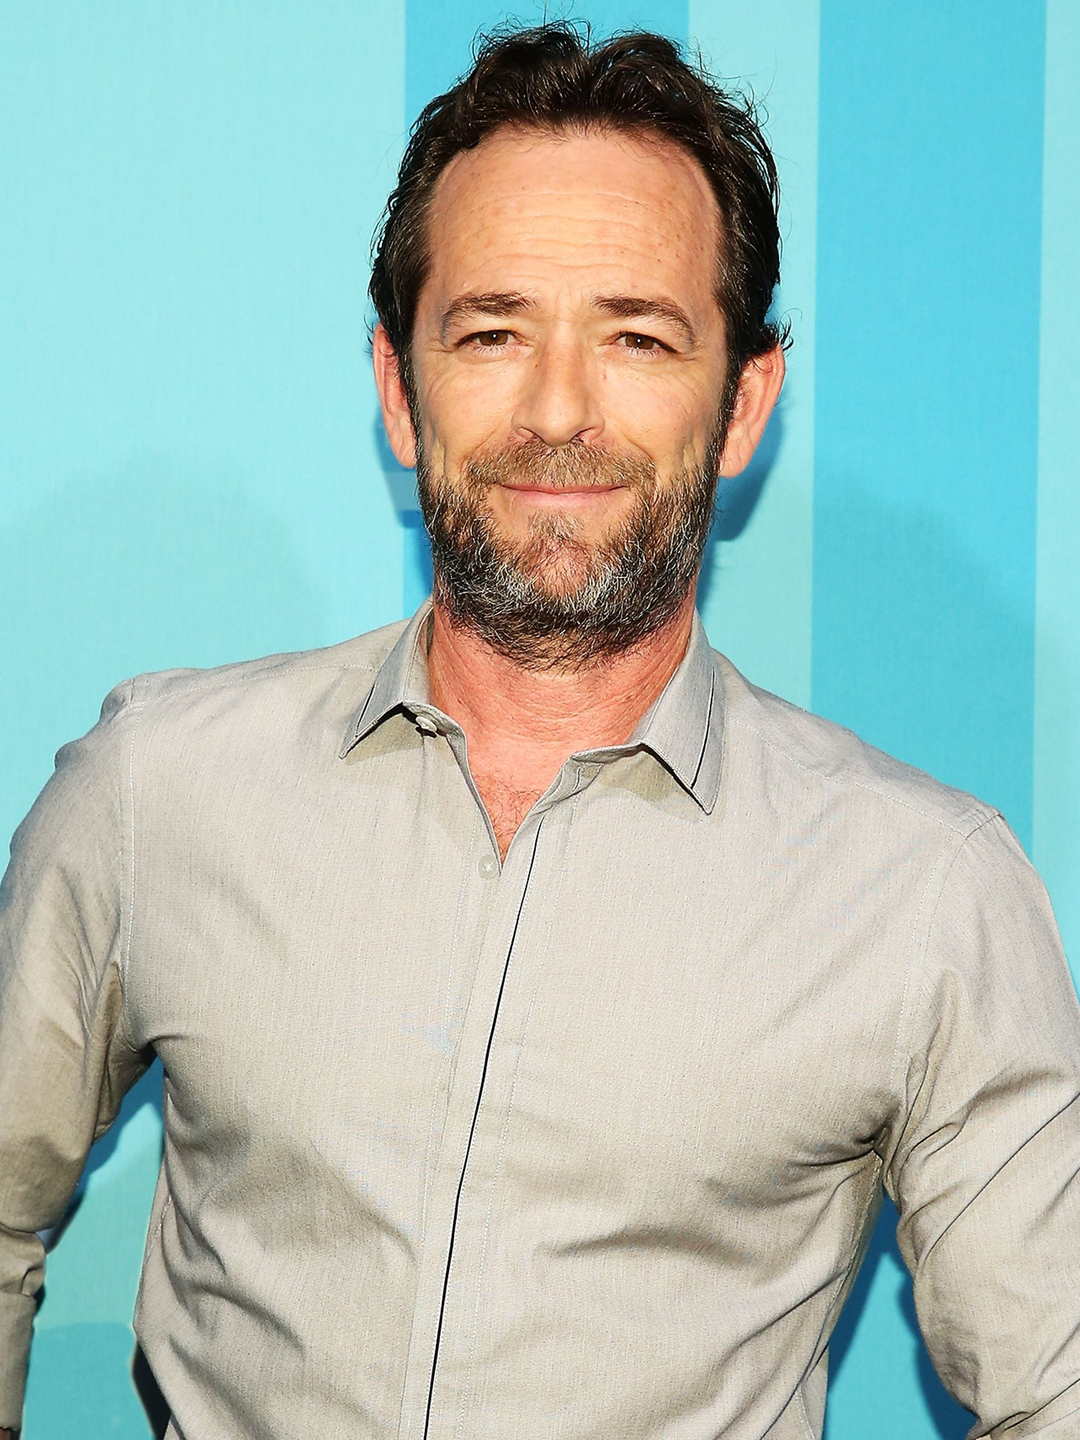 Luke Perry who is his father